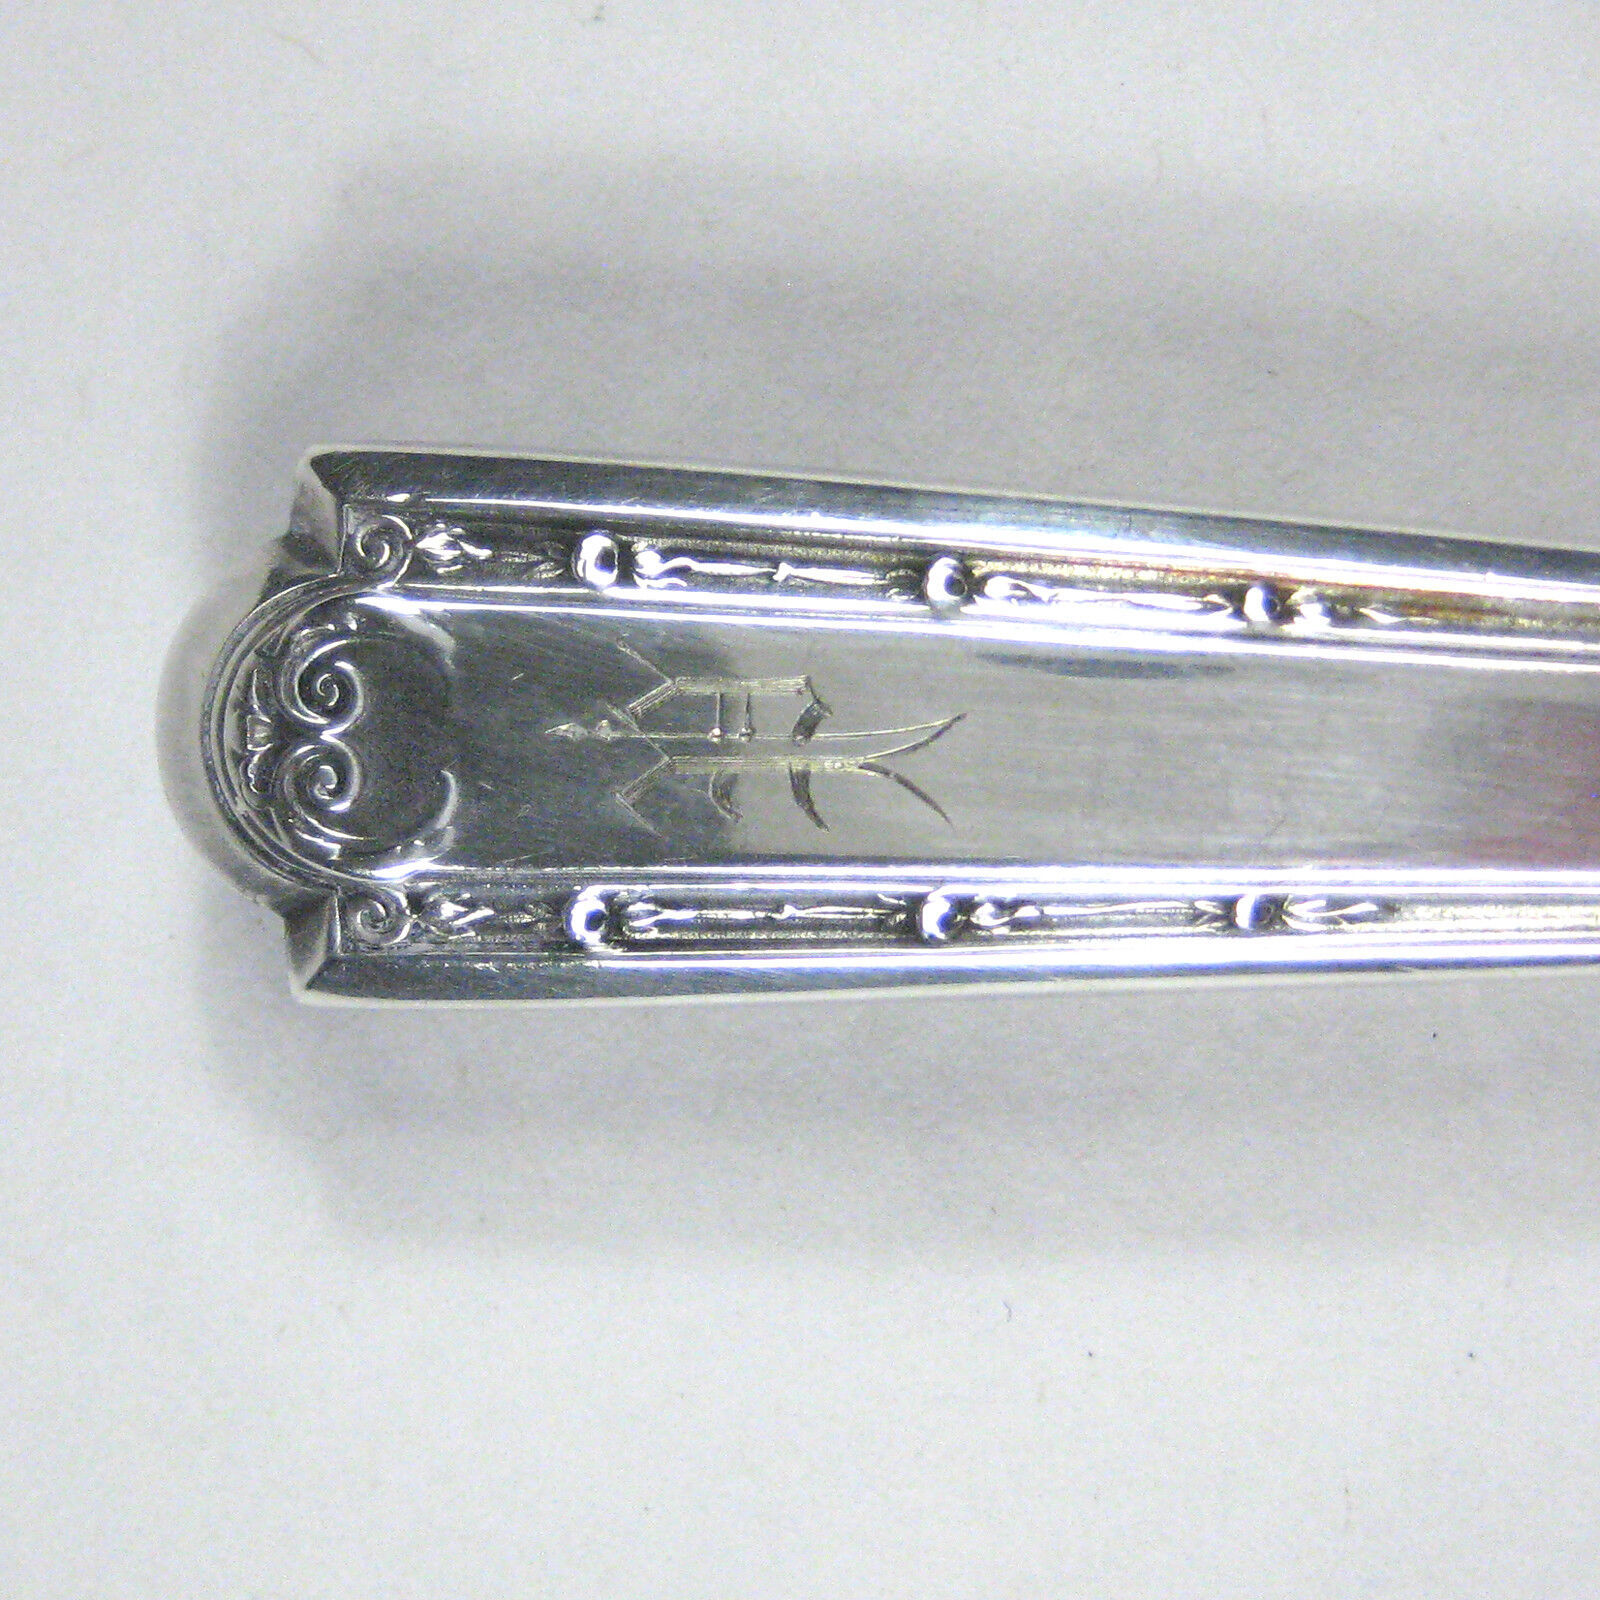 Primary image for R Wallace Cheese Knife Silver Plate 6 1/4 Inches Long Initials Monogram Letter P